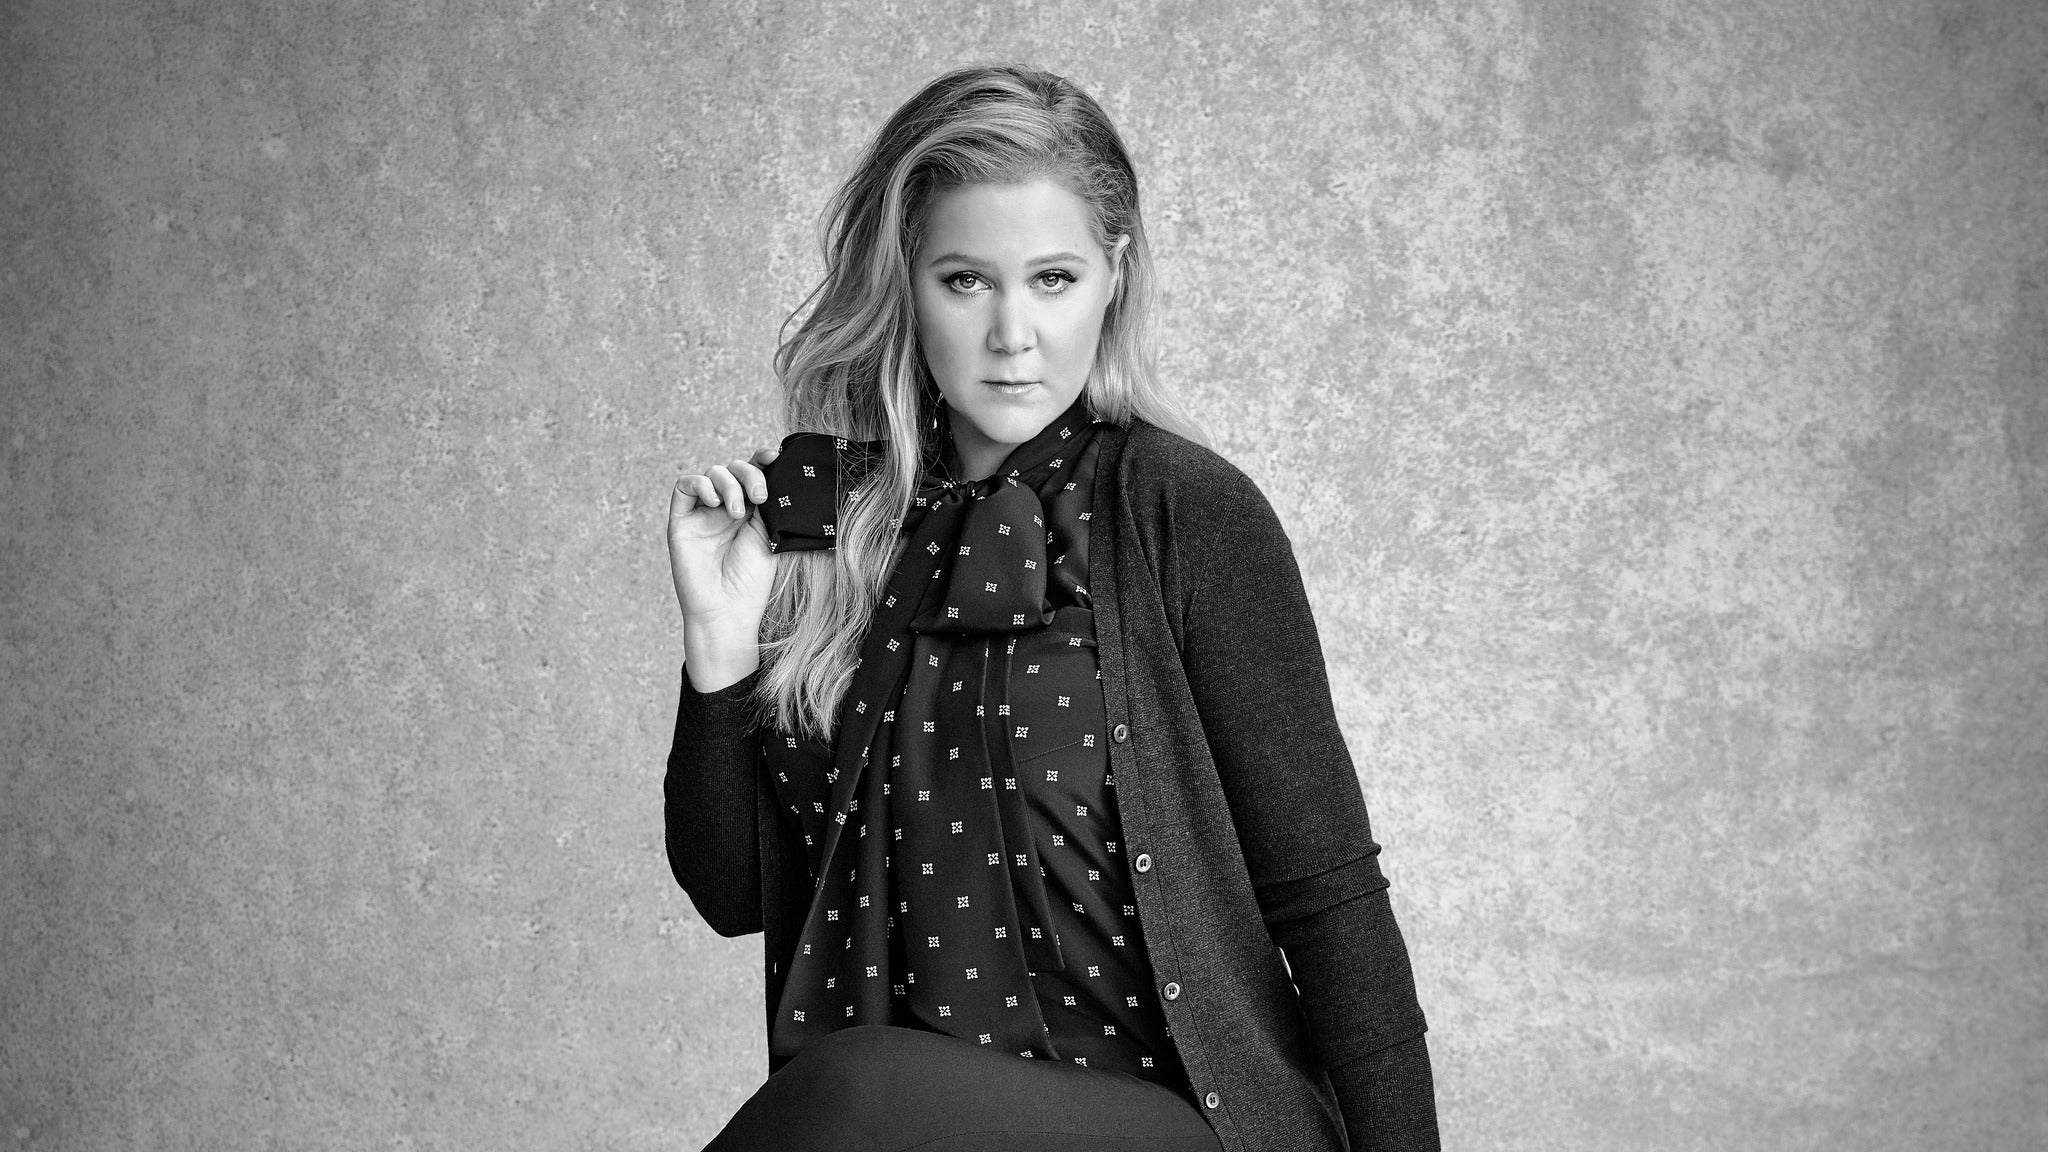 Netflix Is A Joke at The Palladium Hosted by Amy Schumer in Hollywood promo photo for Ticketmaster presale offer code